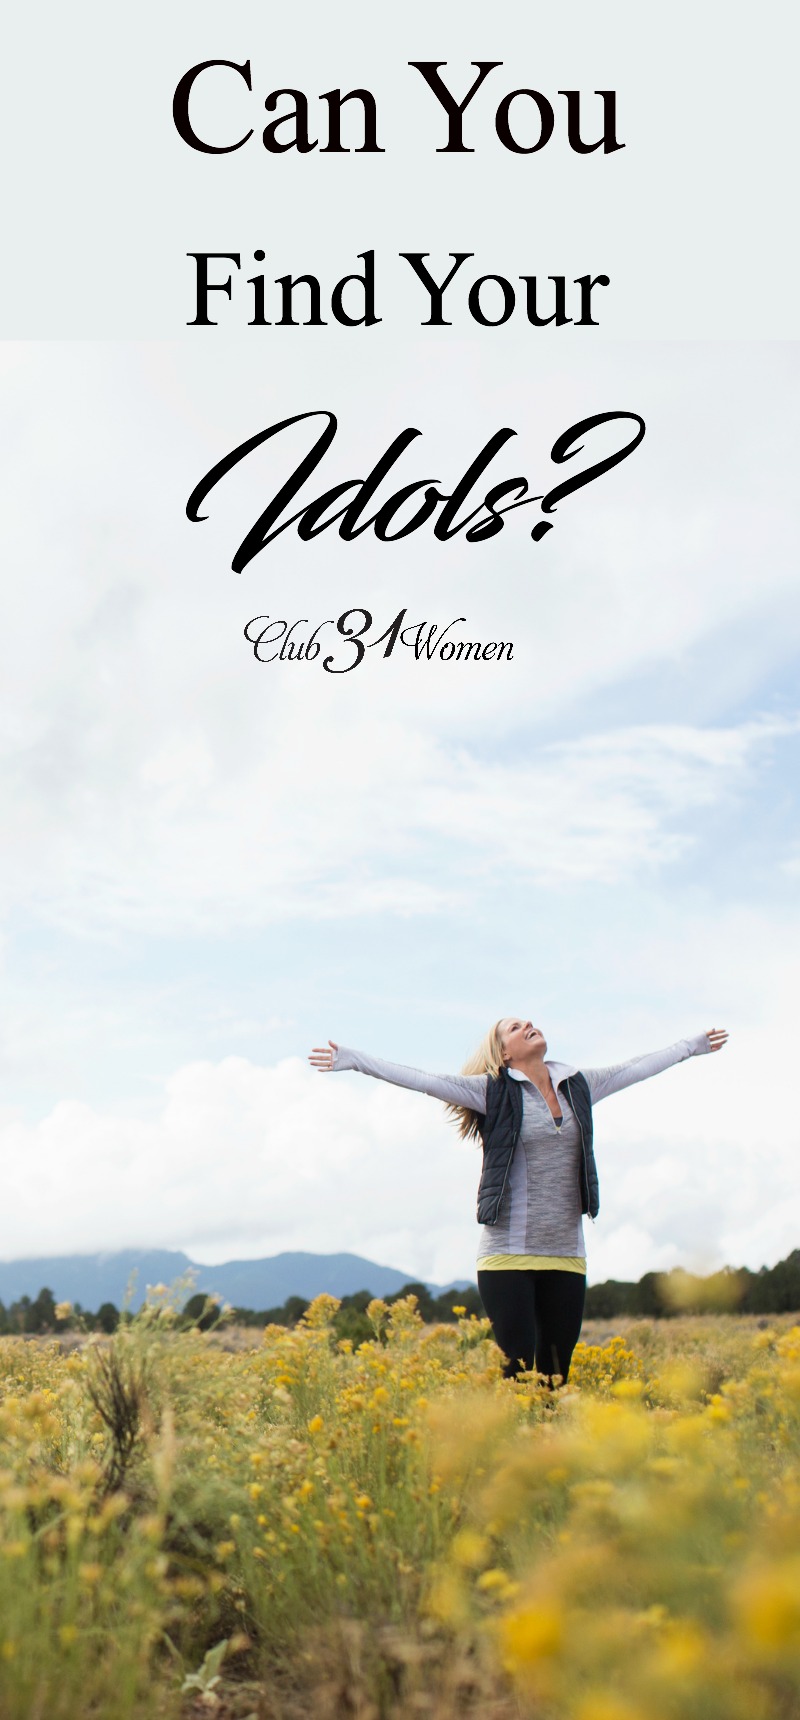 What are idols and how can we identify them in our own lives? What makes them dangerous and why do we need to eradicate their existence? via @Club31Women